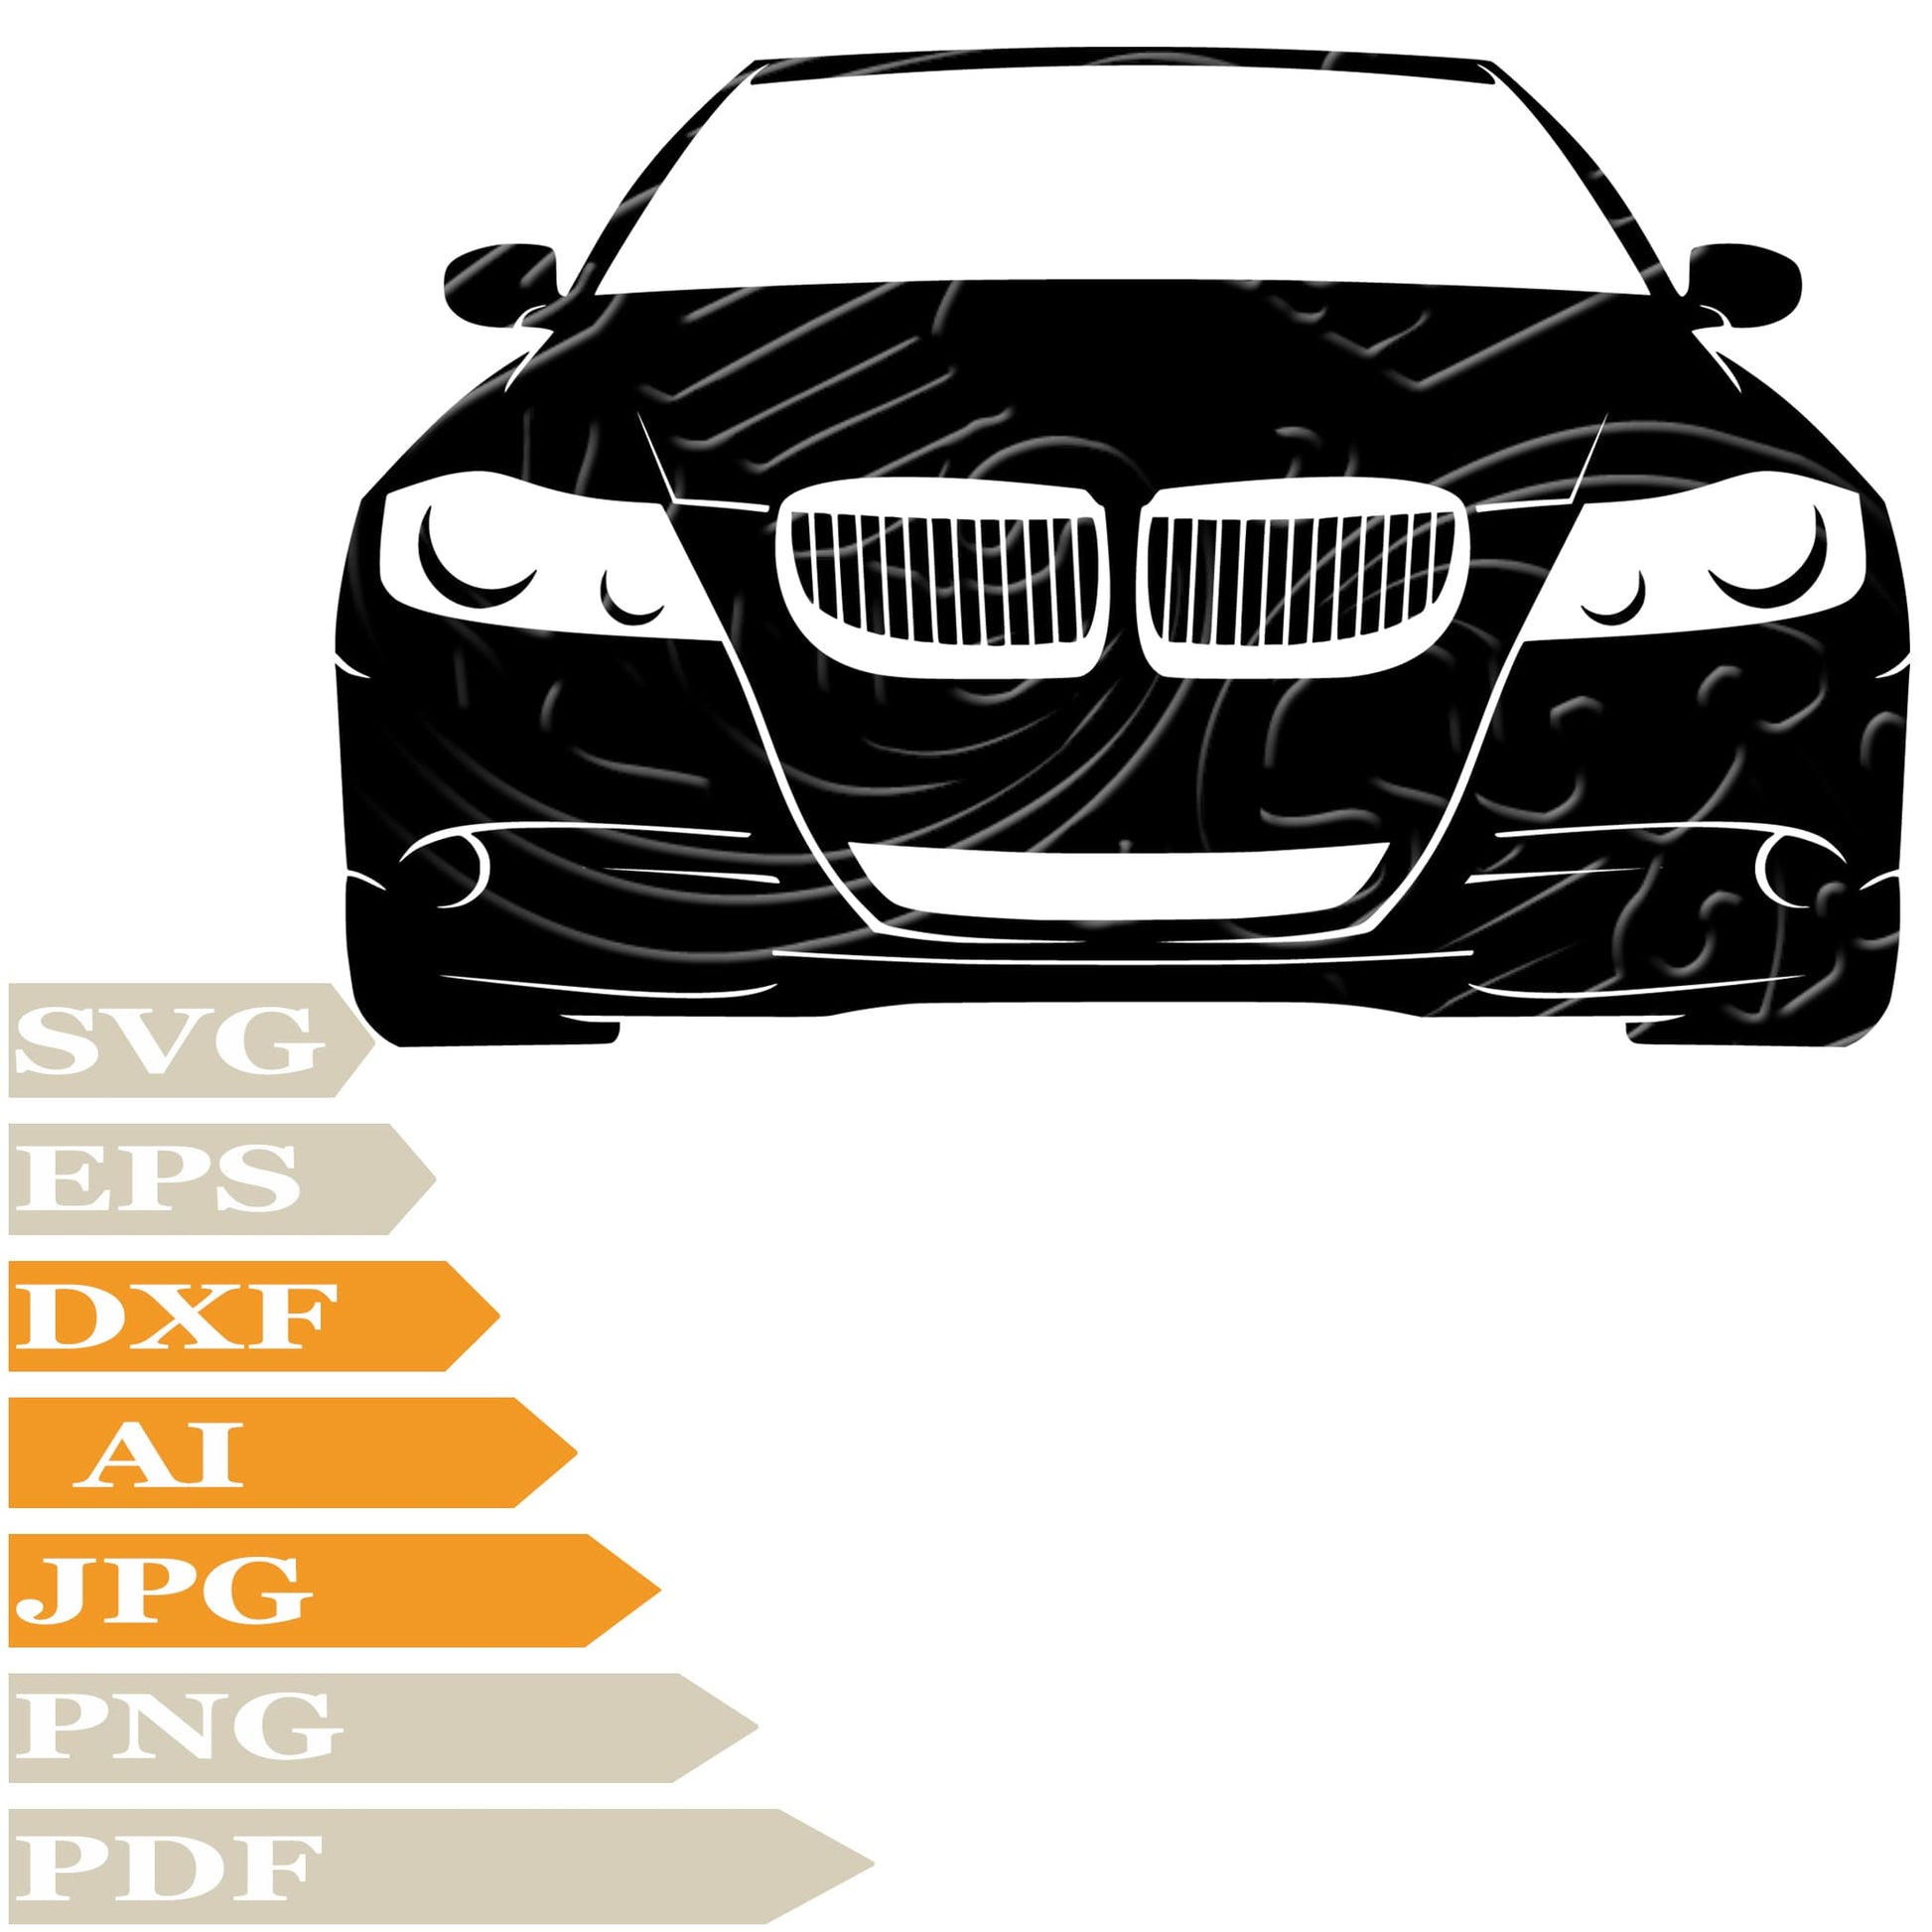 BMW, Sport Car BMW Svg File, Image Cut, Png, For Tattoo, Silhouette, Digital Vector Download, Cut File, Clipart, For Cricut